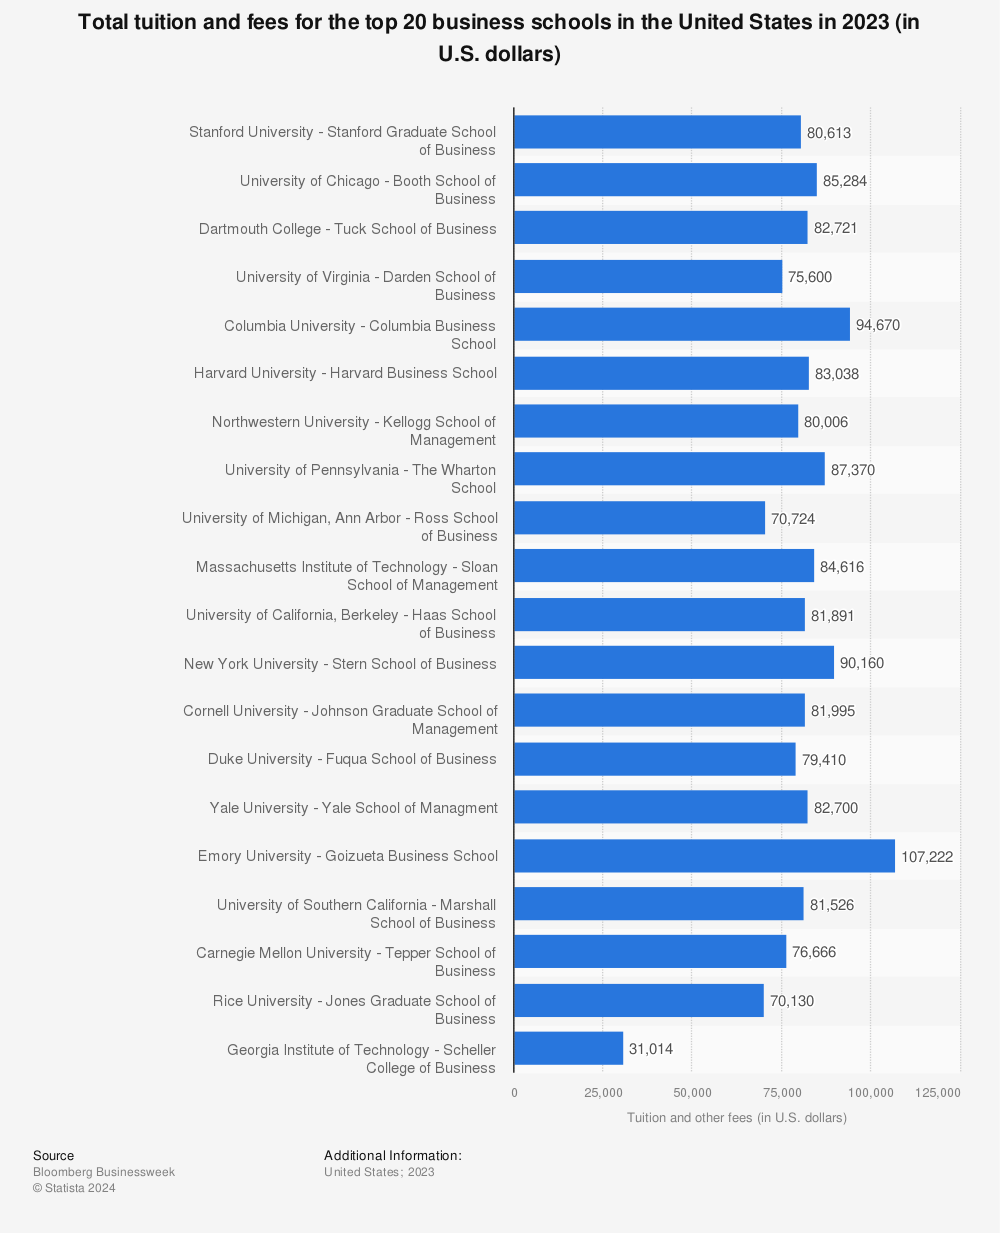 Statistic: Total tuition and fees for the top 20 full-time MBA programs in the United States 2014 | Statista